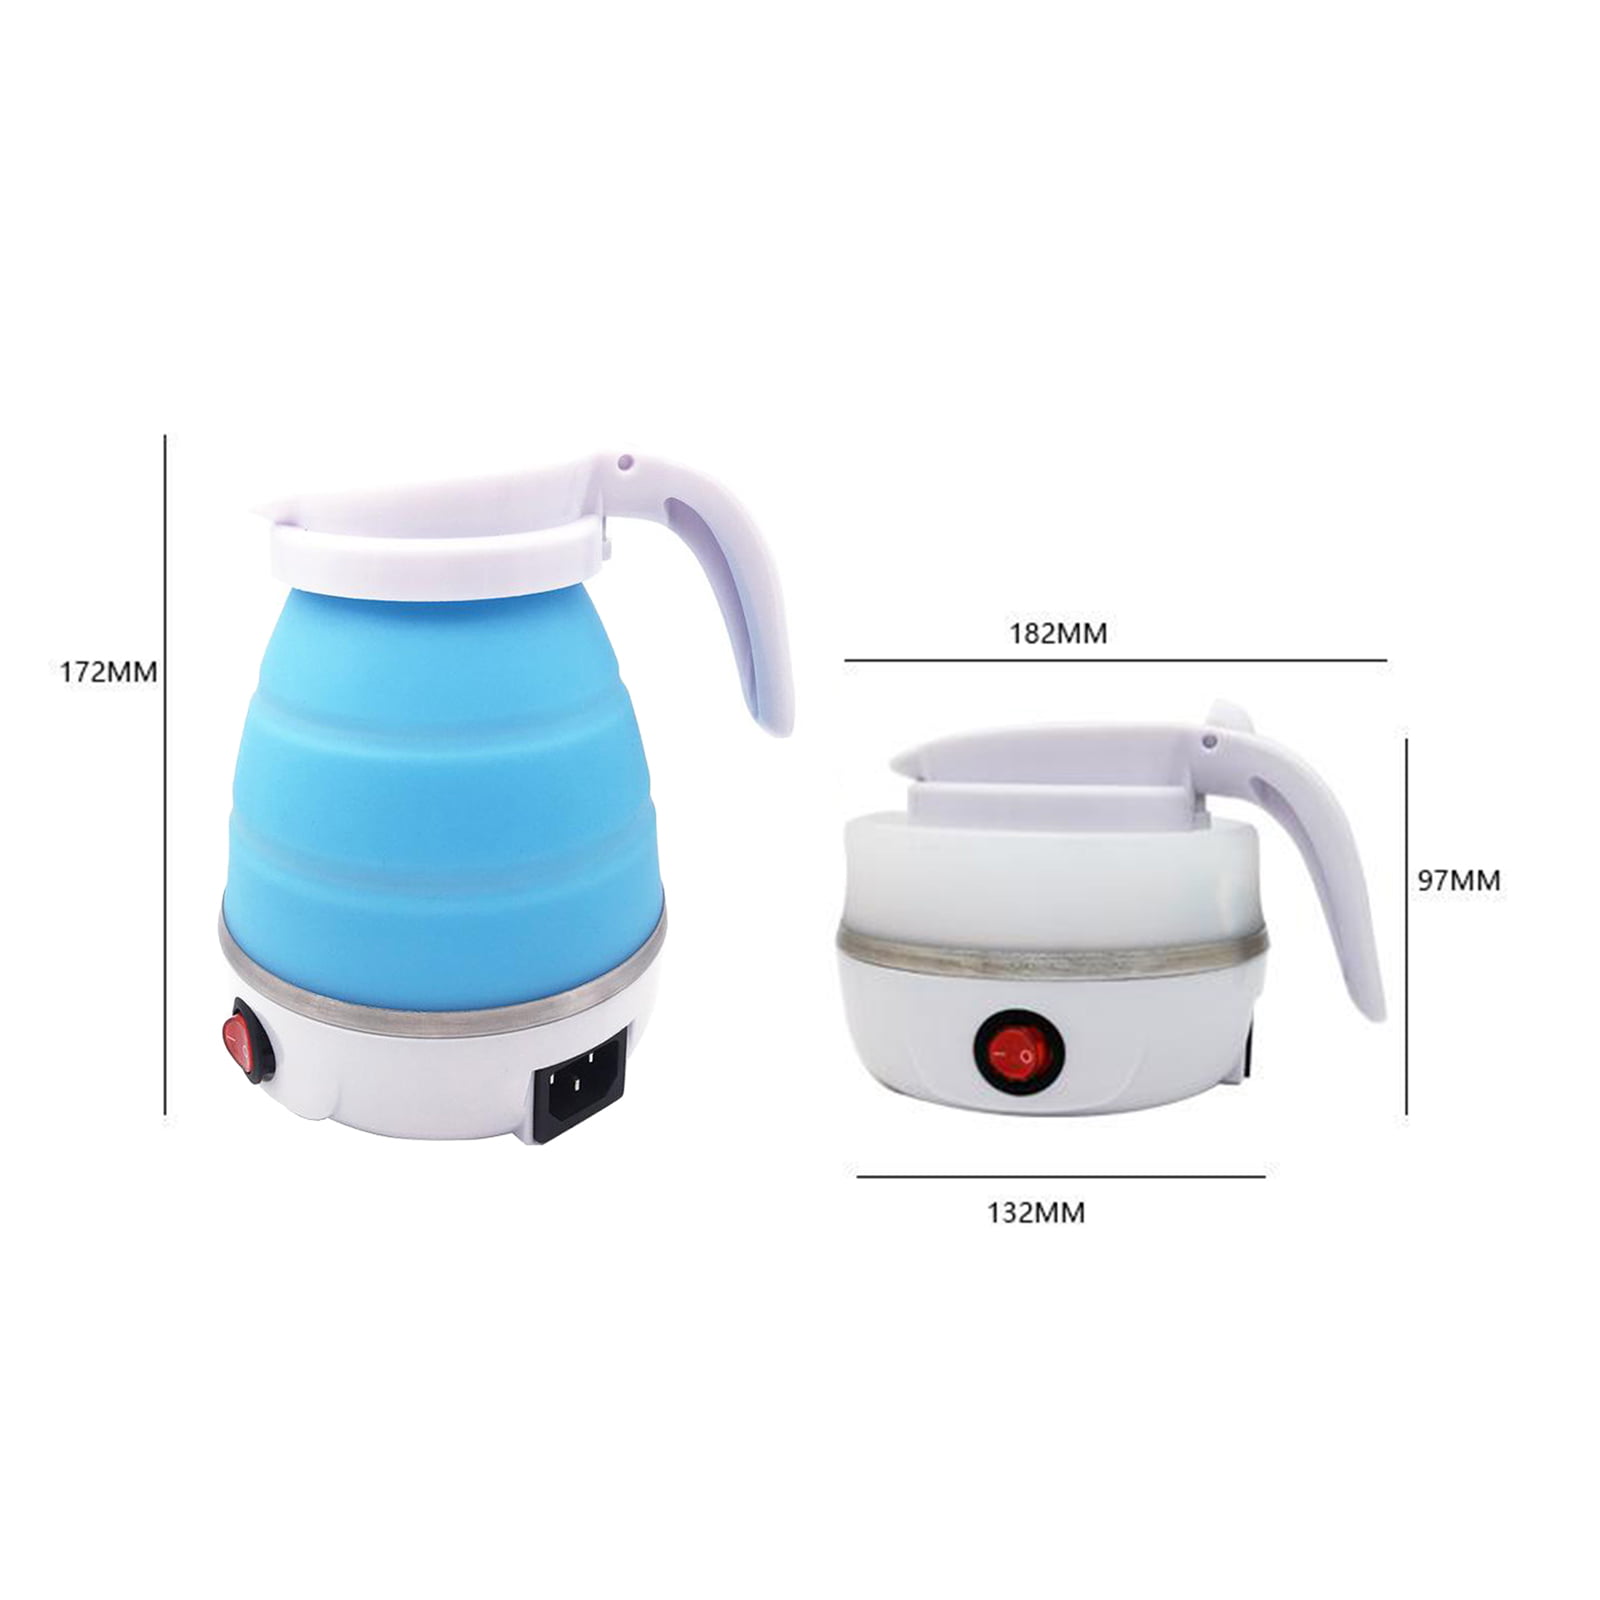 Collapsible Water Boiler, US Plug 110V Portable Foldable Electric Kettle  High Temperature Resistant Detachable Power Cord for Camping (Blue)